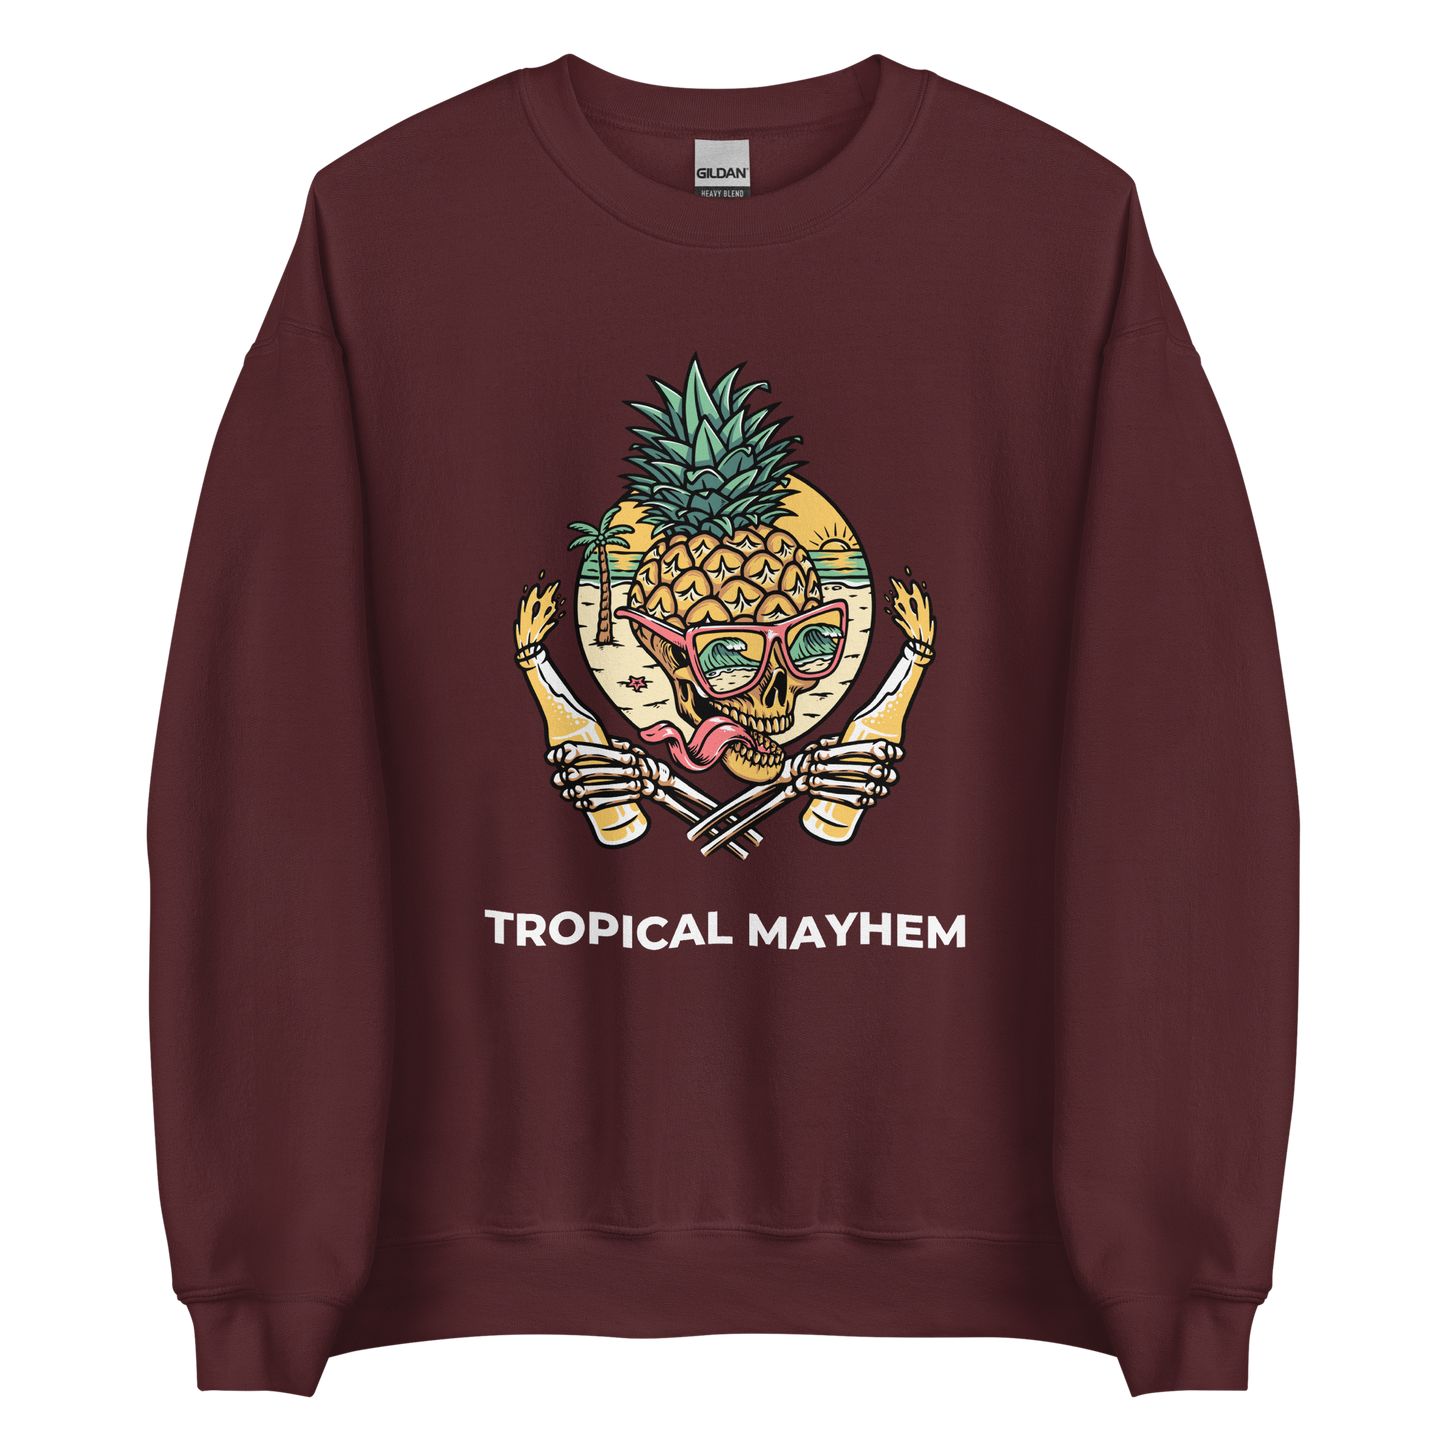 Maroon Tropical Mayhem Sweatshirt featuring a Crazy Pineapple Skull graphic on the chest - Funny Graphic Pineapple Sweatshirts - Boozy Fox